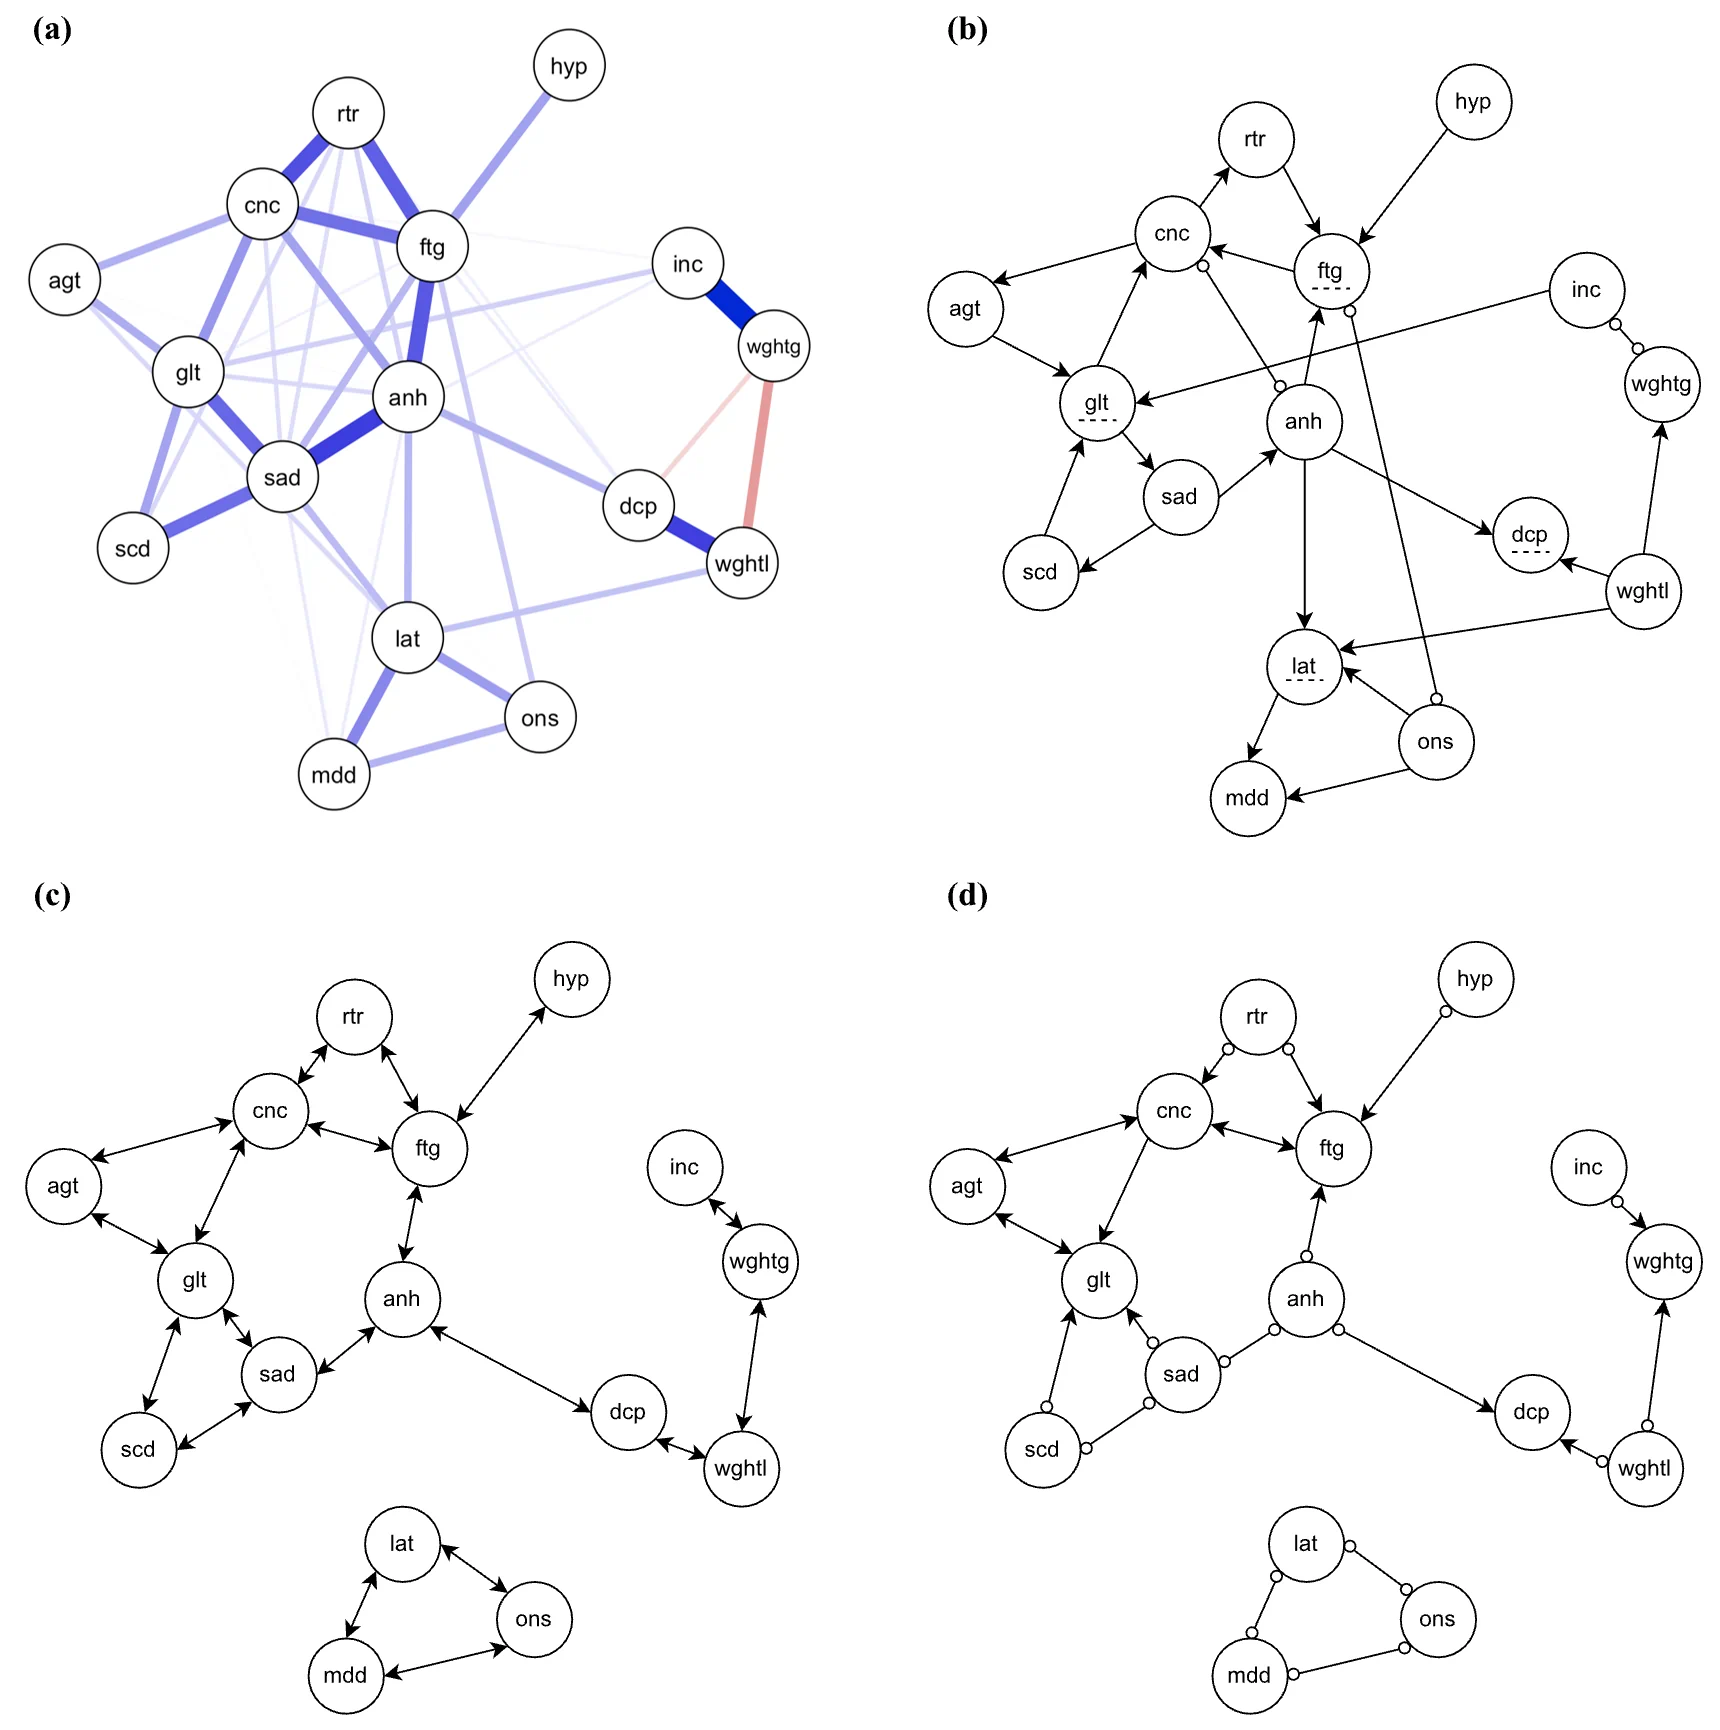 Comparative visual of a statistical network model and estimated partial ancestral graphs from empirical data.